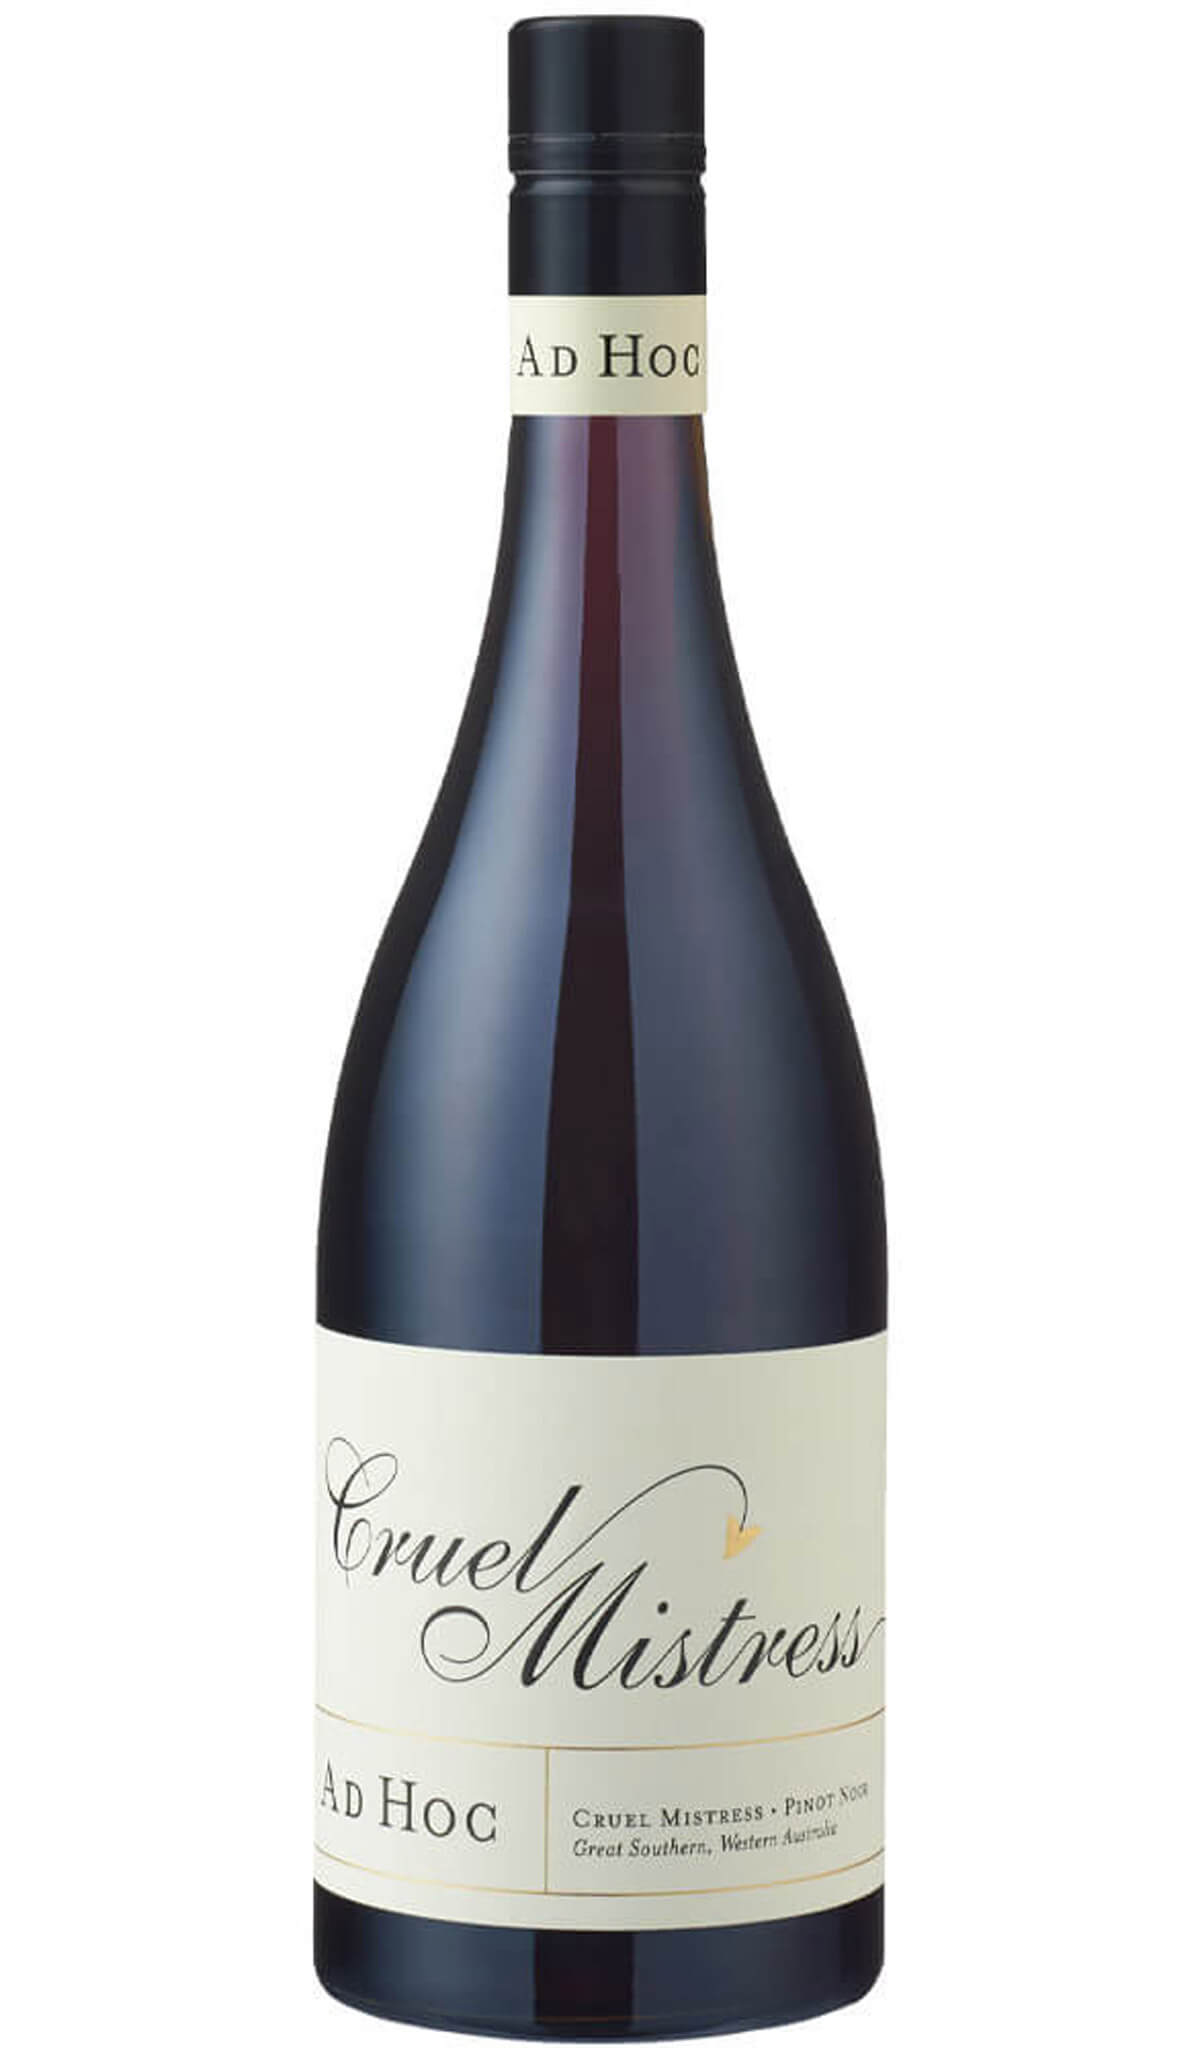 Find out more or buy Cherubino Ad Hoc Cruel Mistress Pinot Noir 2022 online at Wine Sellers Direct - Australia’s independent liquor specialists.